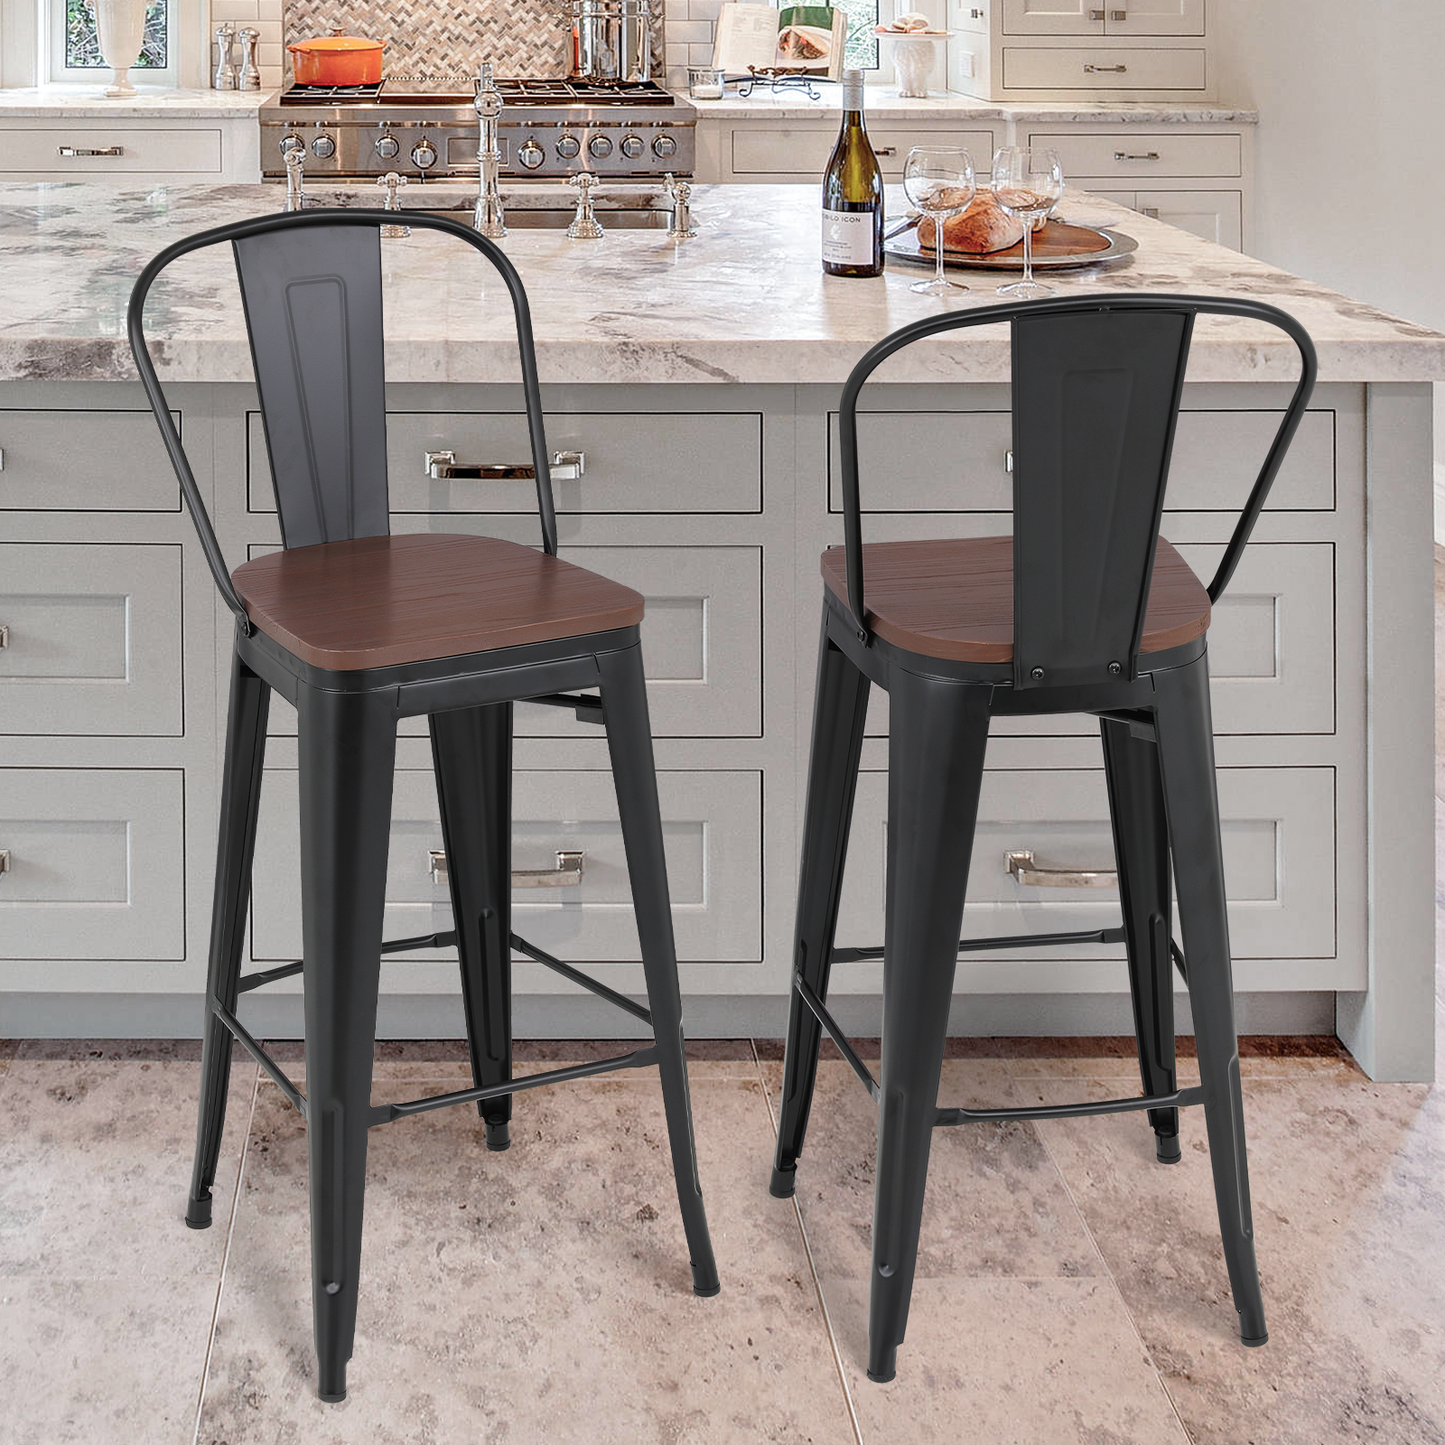 2 Pieces Bar Chairs - Metal Frame w/Wooden Seat - 30.5'' Seat to Floor